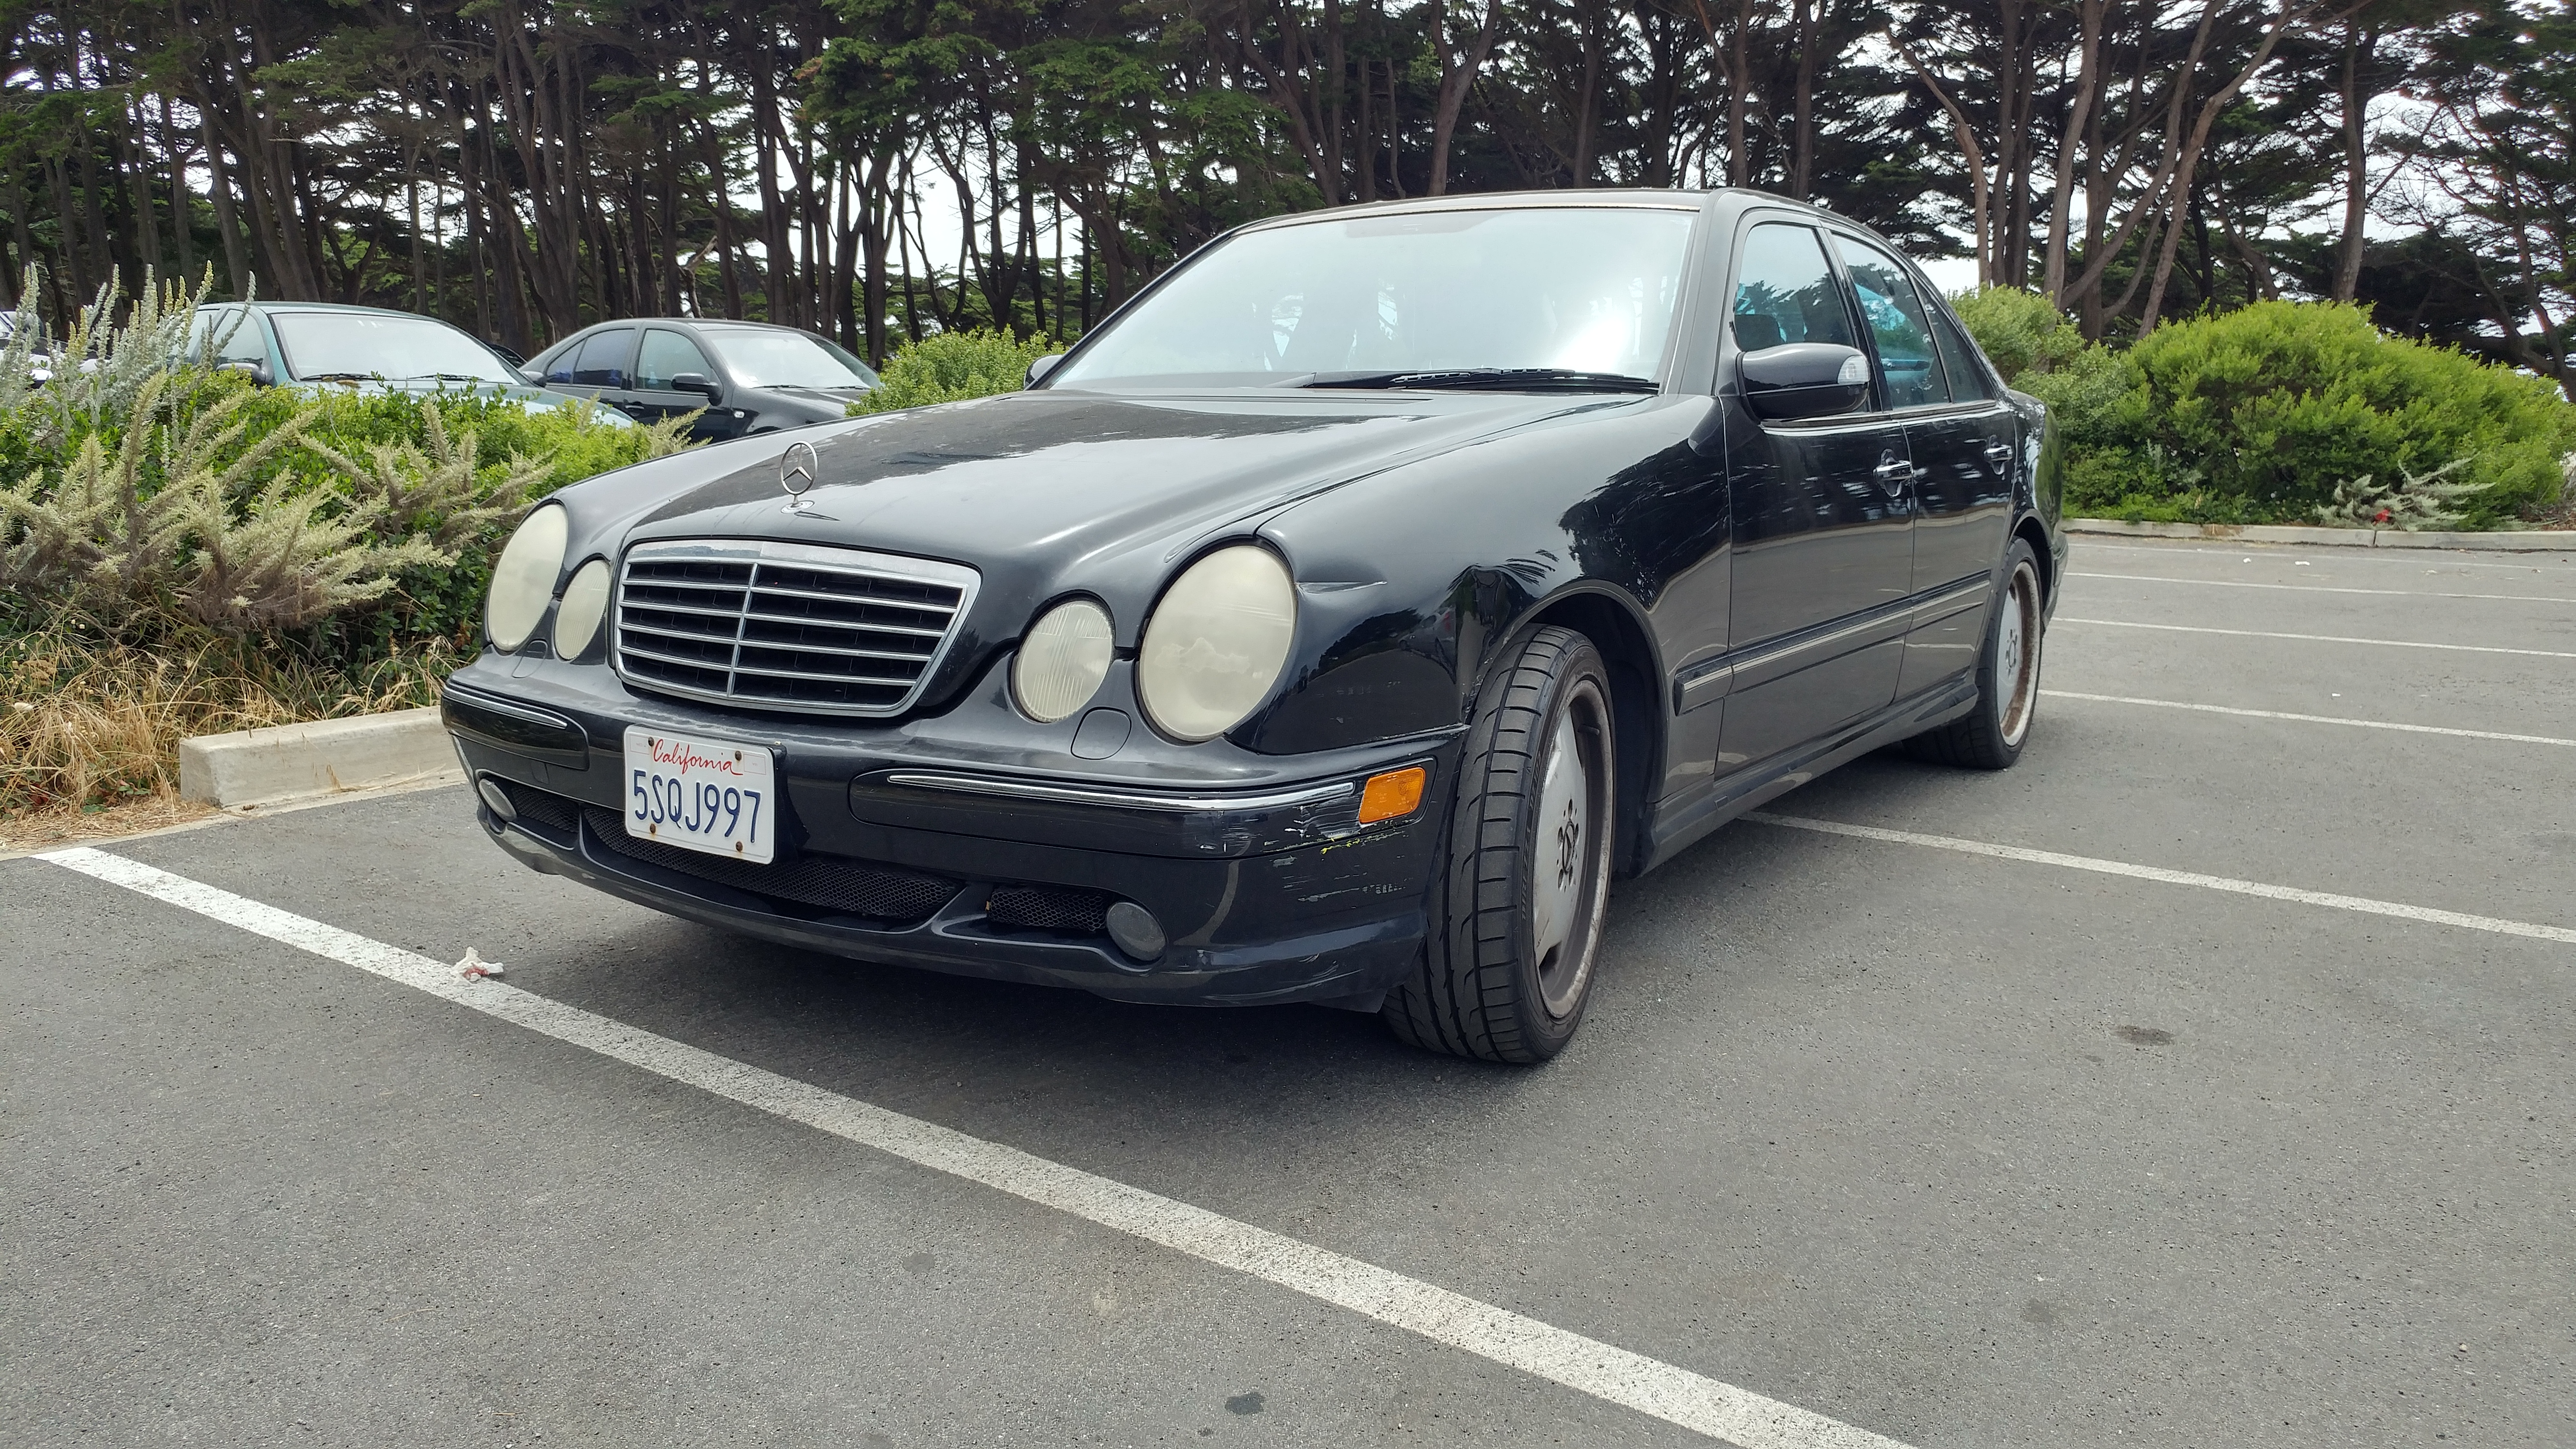 2002 Mercedes-Benz E55 AMG: 2200 miles in 10 days; reckon that has bedded in the new trans!